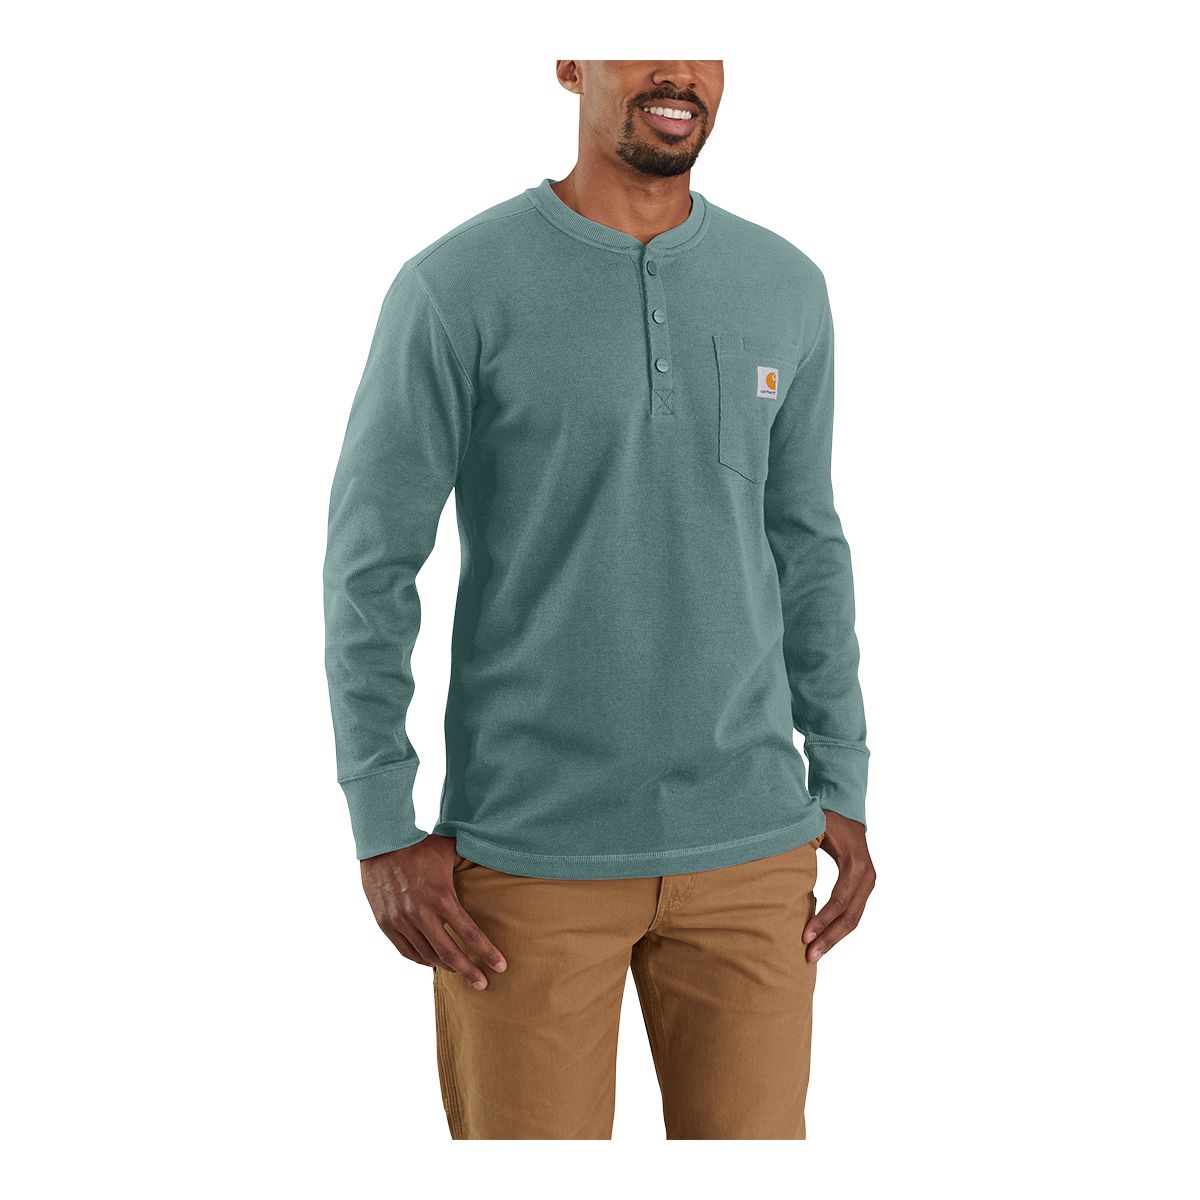 Long Sleeve Relaxed Fit Thermal Shirt - Grey